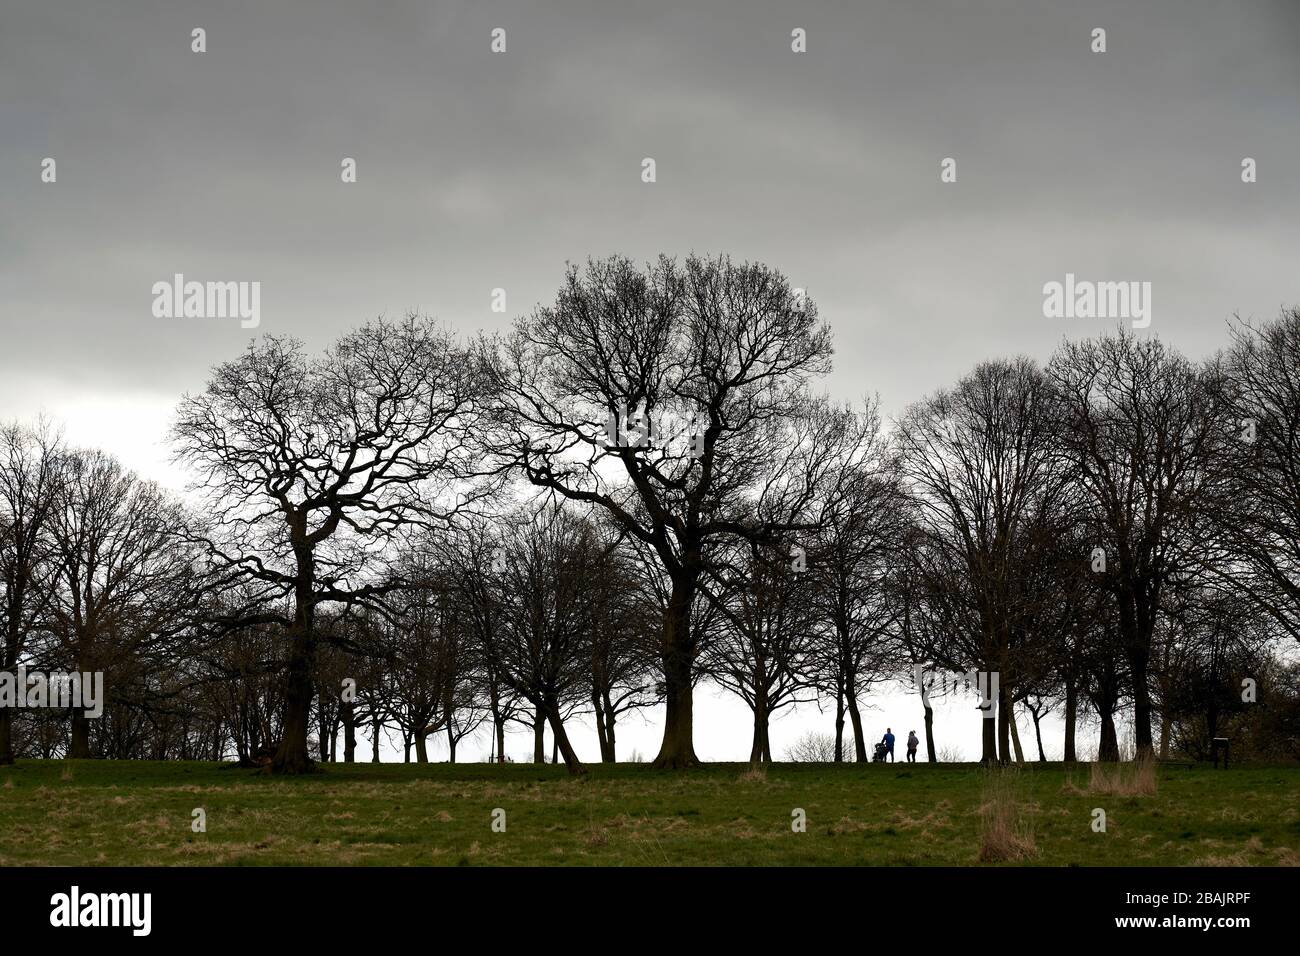 Birmingham, UK. 28th Mar, 2020. A family takes a walk in Selly Oak park, Birmingham UK today.  The UK Government are encouraging people to walk at least 2 meters apart and to exercise once a day to help stop the spread of Coranavirus (Covid-19) Credit: Edward Moss/Alamy Live News Stock Photo